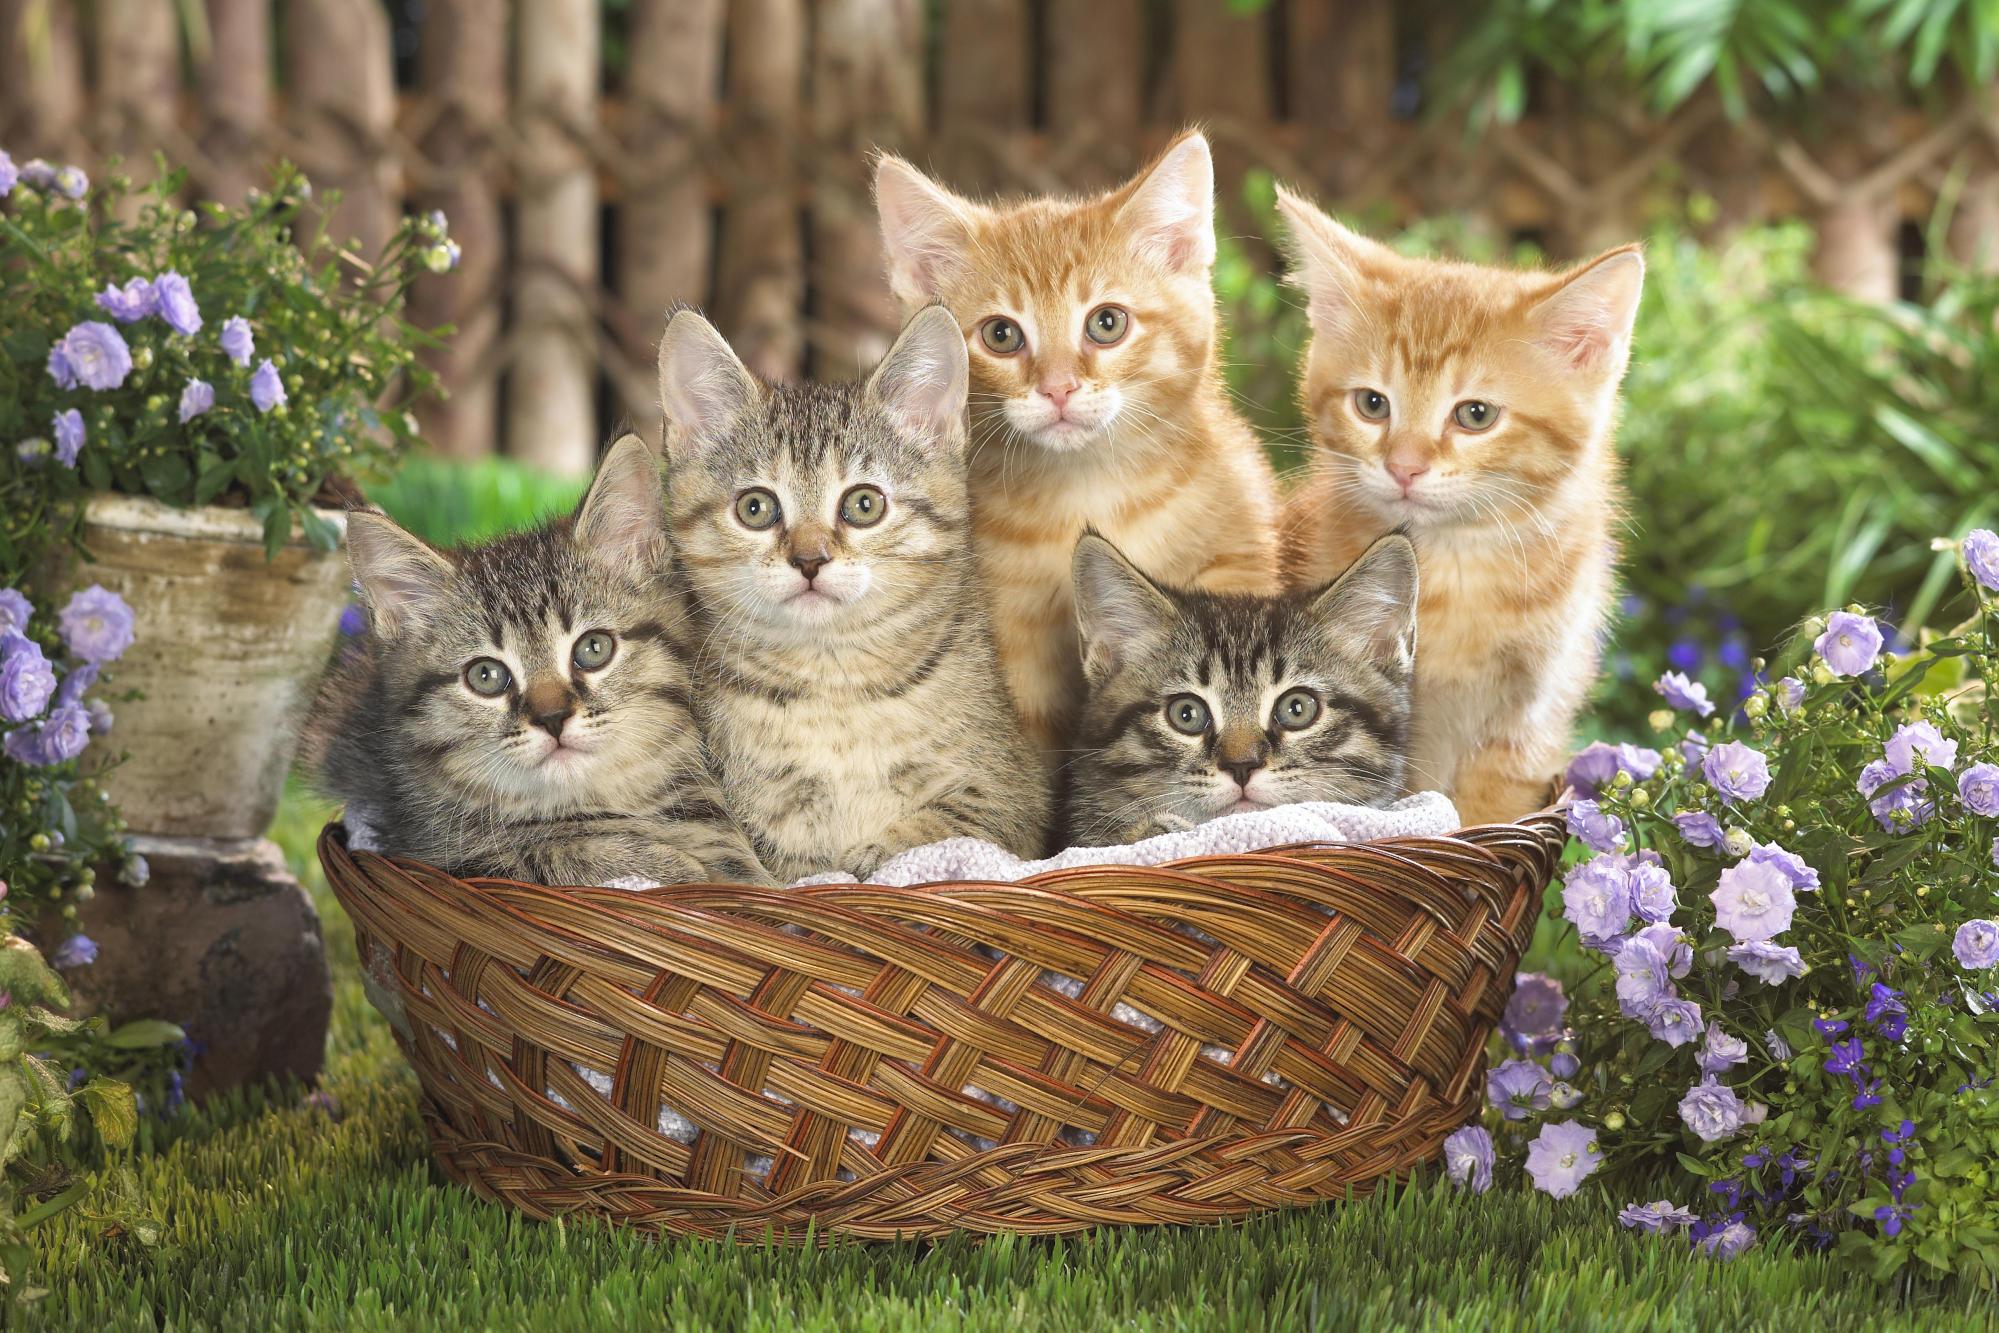 Котики картинки. Kittens in a Basket Photographic Print on Canvas. Kittens in a Basket Photographic Print on Canvas animal.